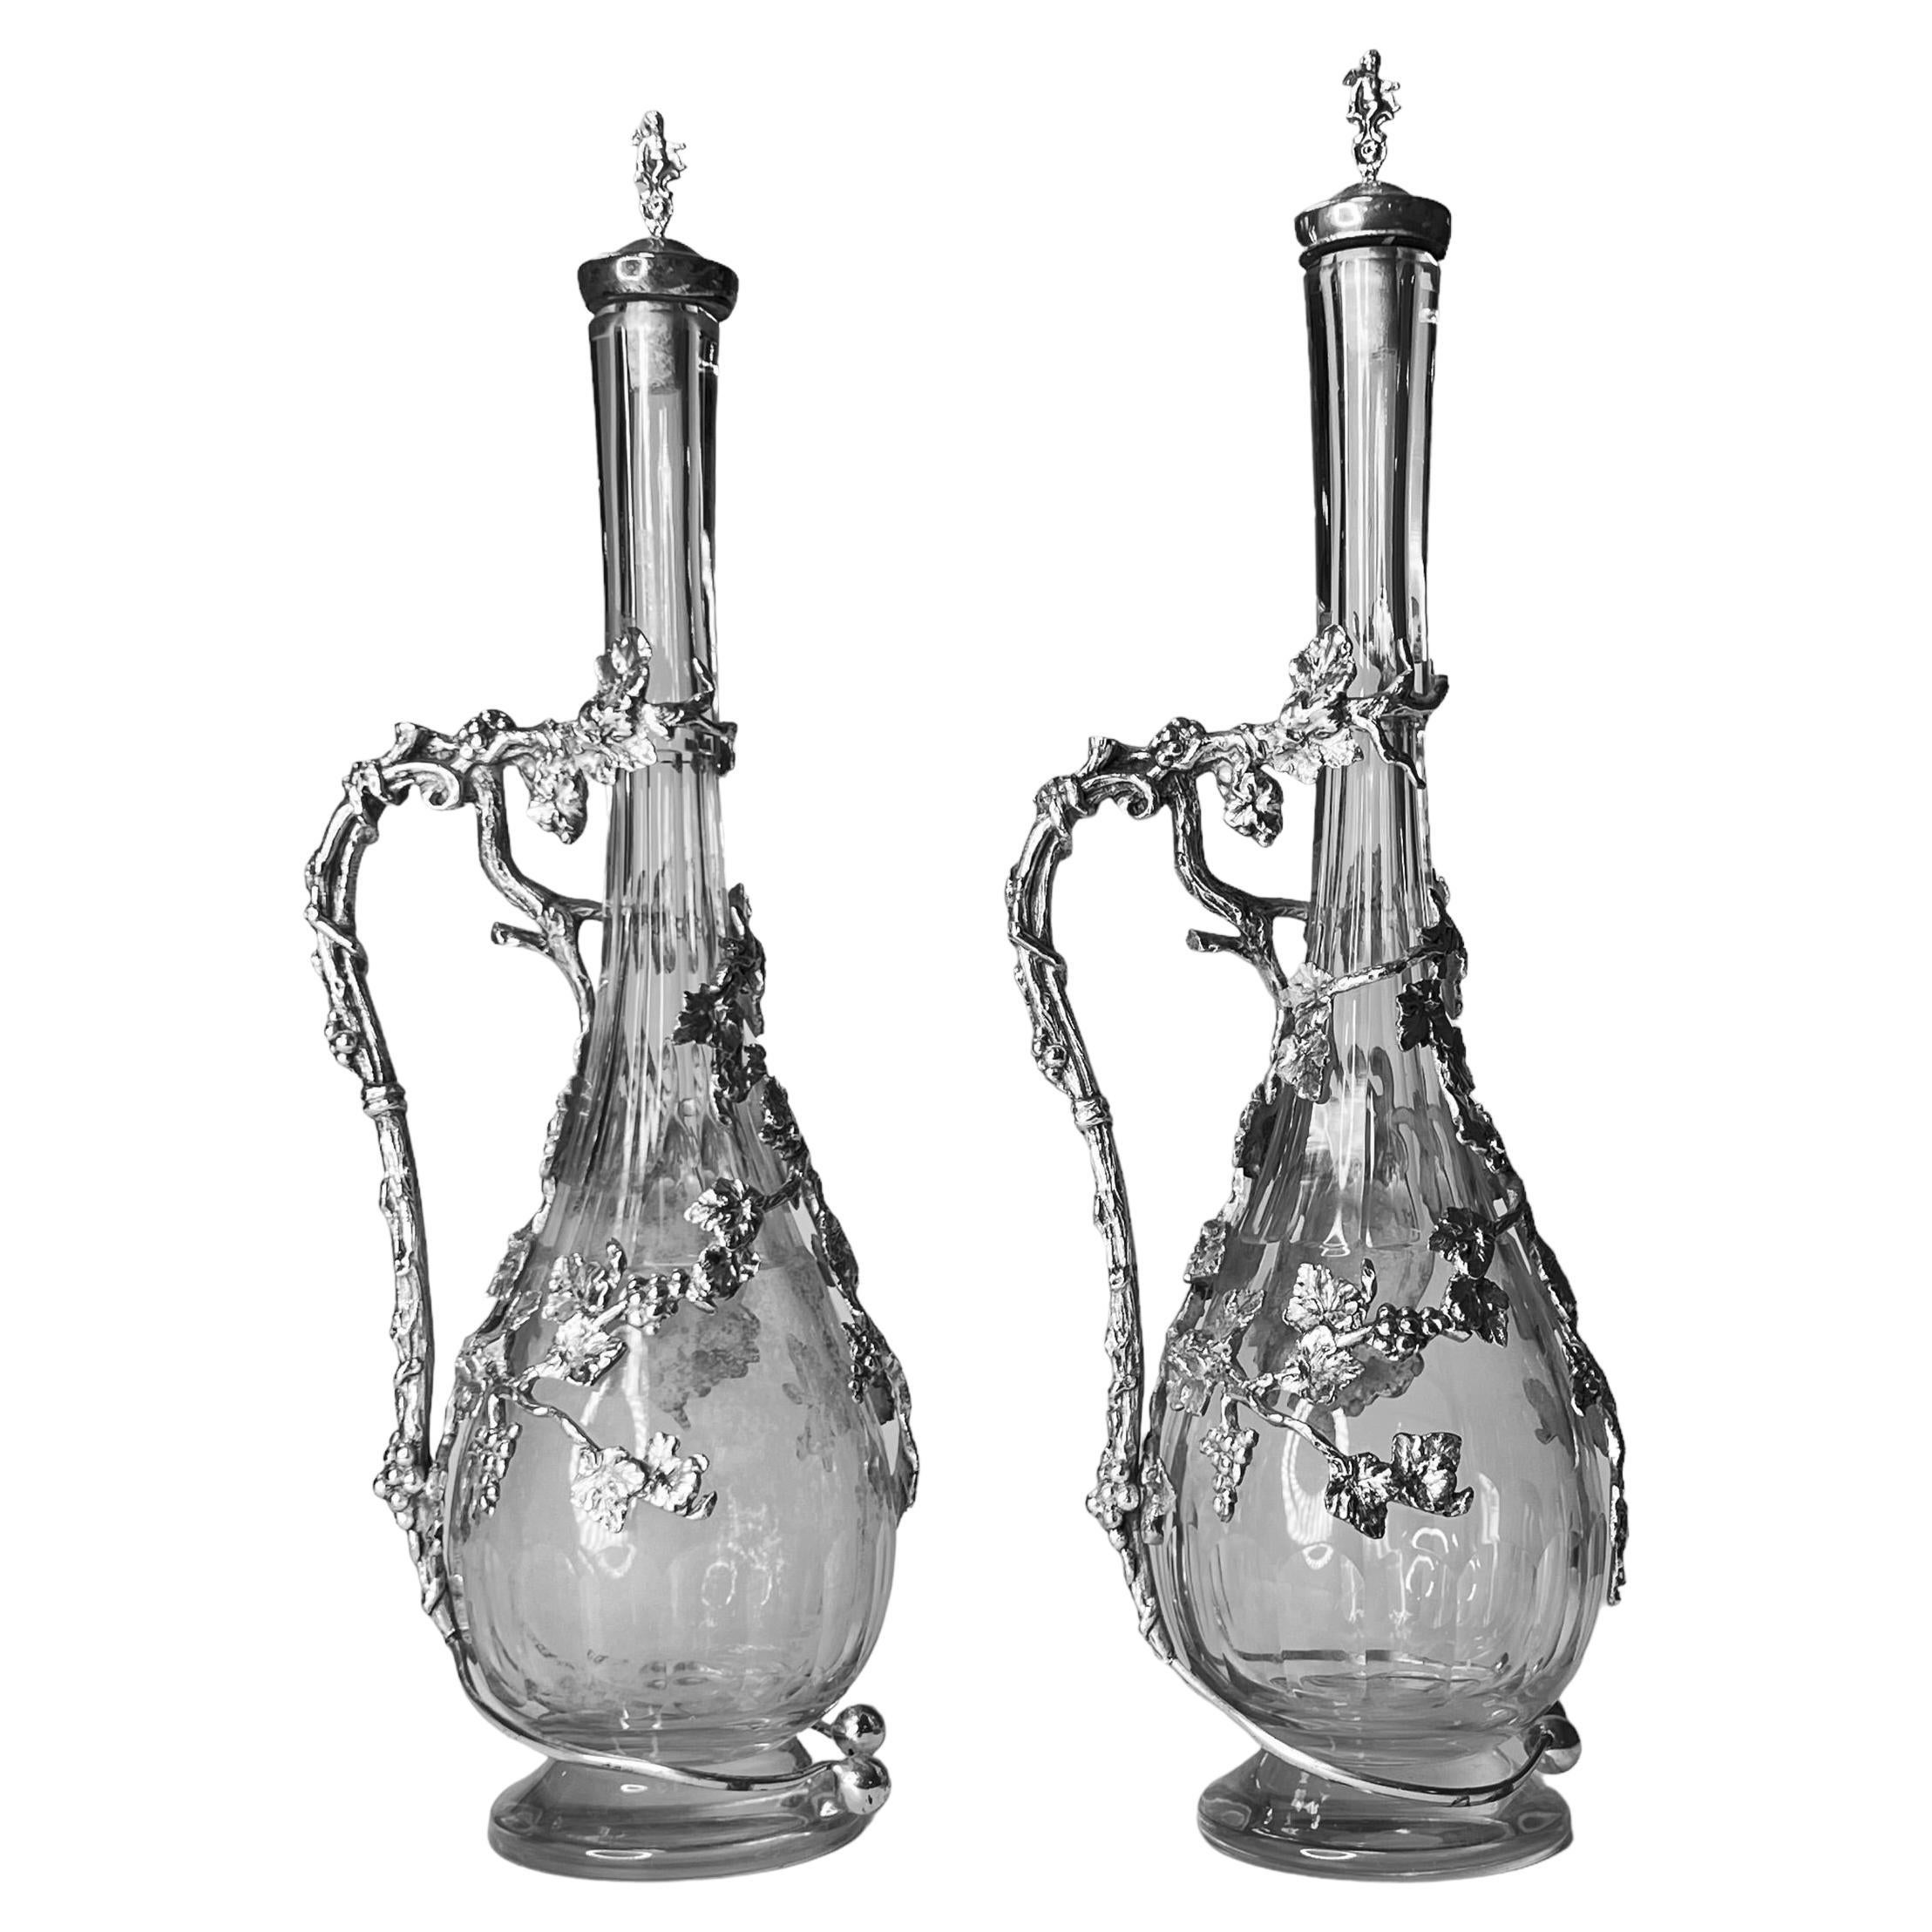 Pair Antique Italian Silvered Glass Wine Decanters